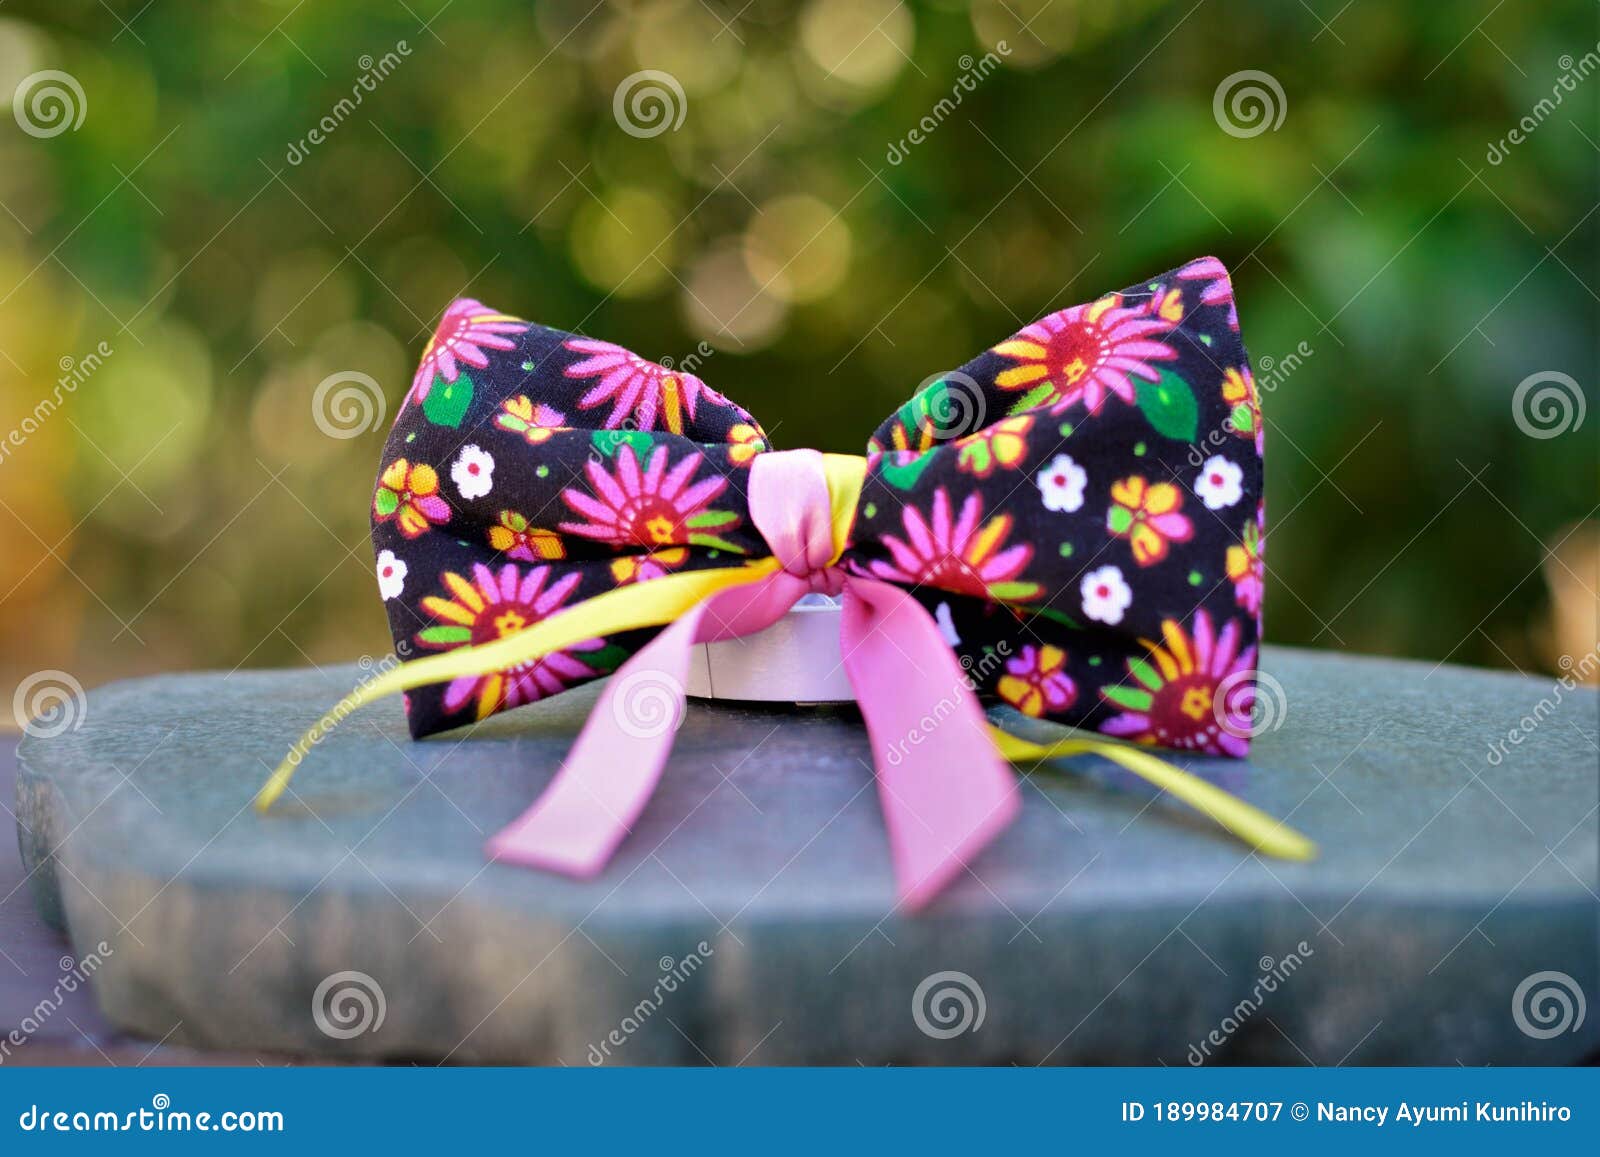 A Beautiful Black Hair Ribbon with Colorful Flowers and Ribbons for Junina  Party Stock Image - Image of decorated, delicate: 189984707